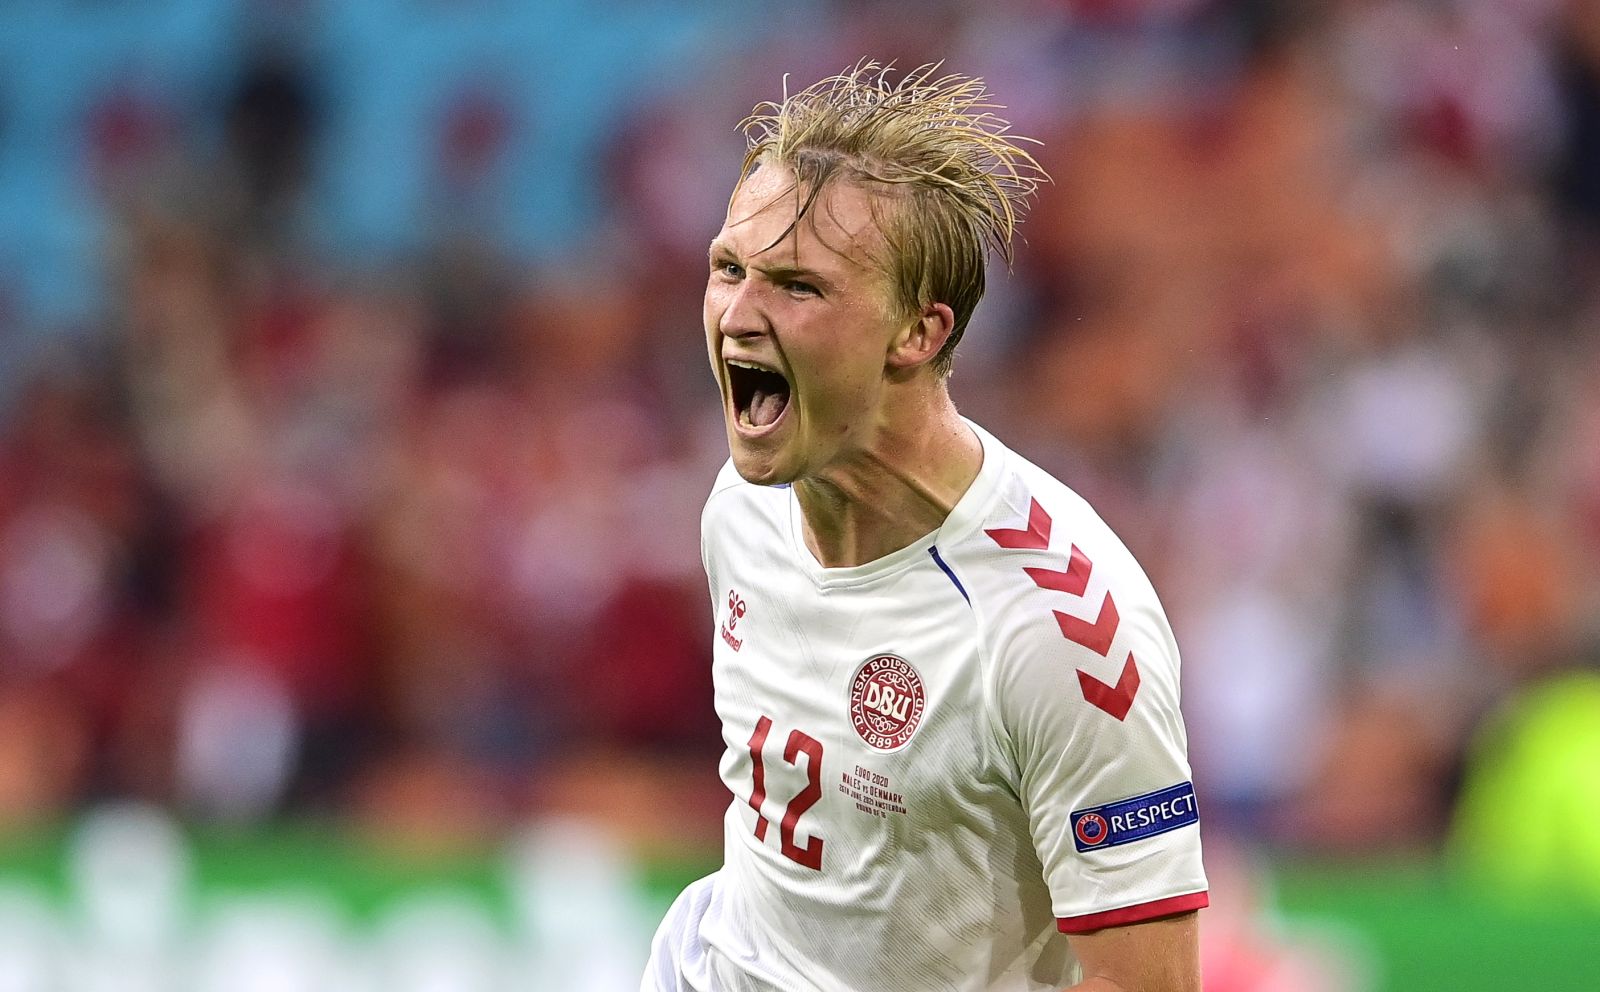 epa09303617 Kasper Dolberg of Denmark celebrates after scoring the 2-0 lead during the UEFA EURO 2020 round of 16 soccer match between Wales and Denmark in Amsterdam, Netherlands, 26 June 2021.  EPA/Olaf Kraak / POOL (RESTRICTIONS: For editorial news reporting purposes only. Images must appear as still images and must not emulate match action video footage. Photographs published in online publications shall have an interval of at least 20 seconds between the posting.)